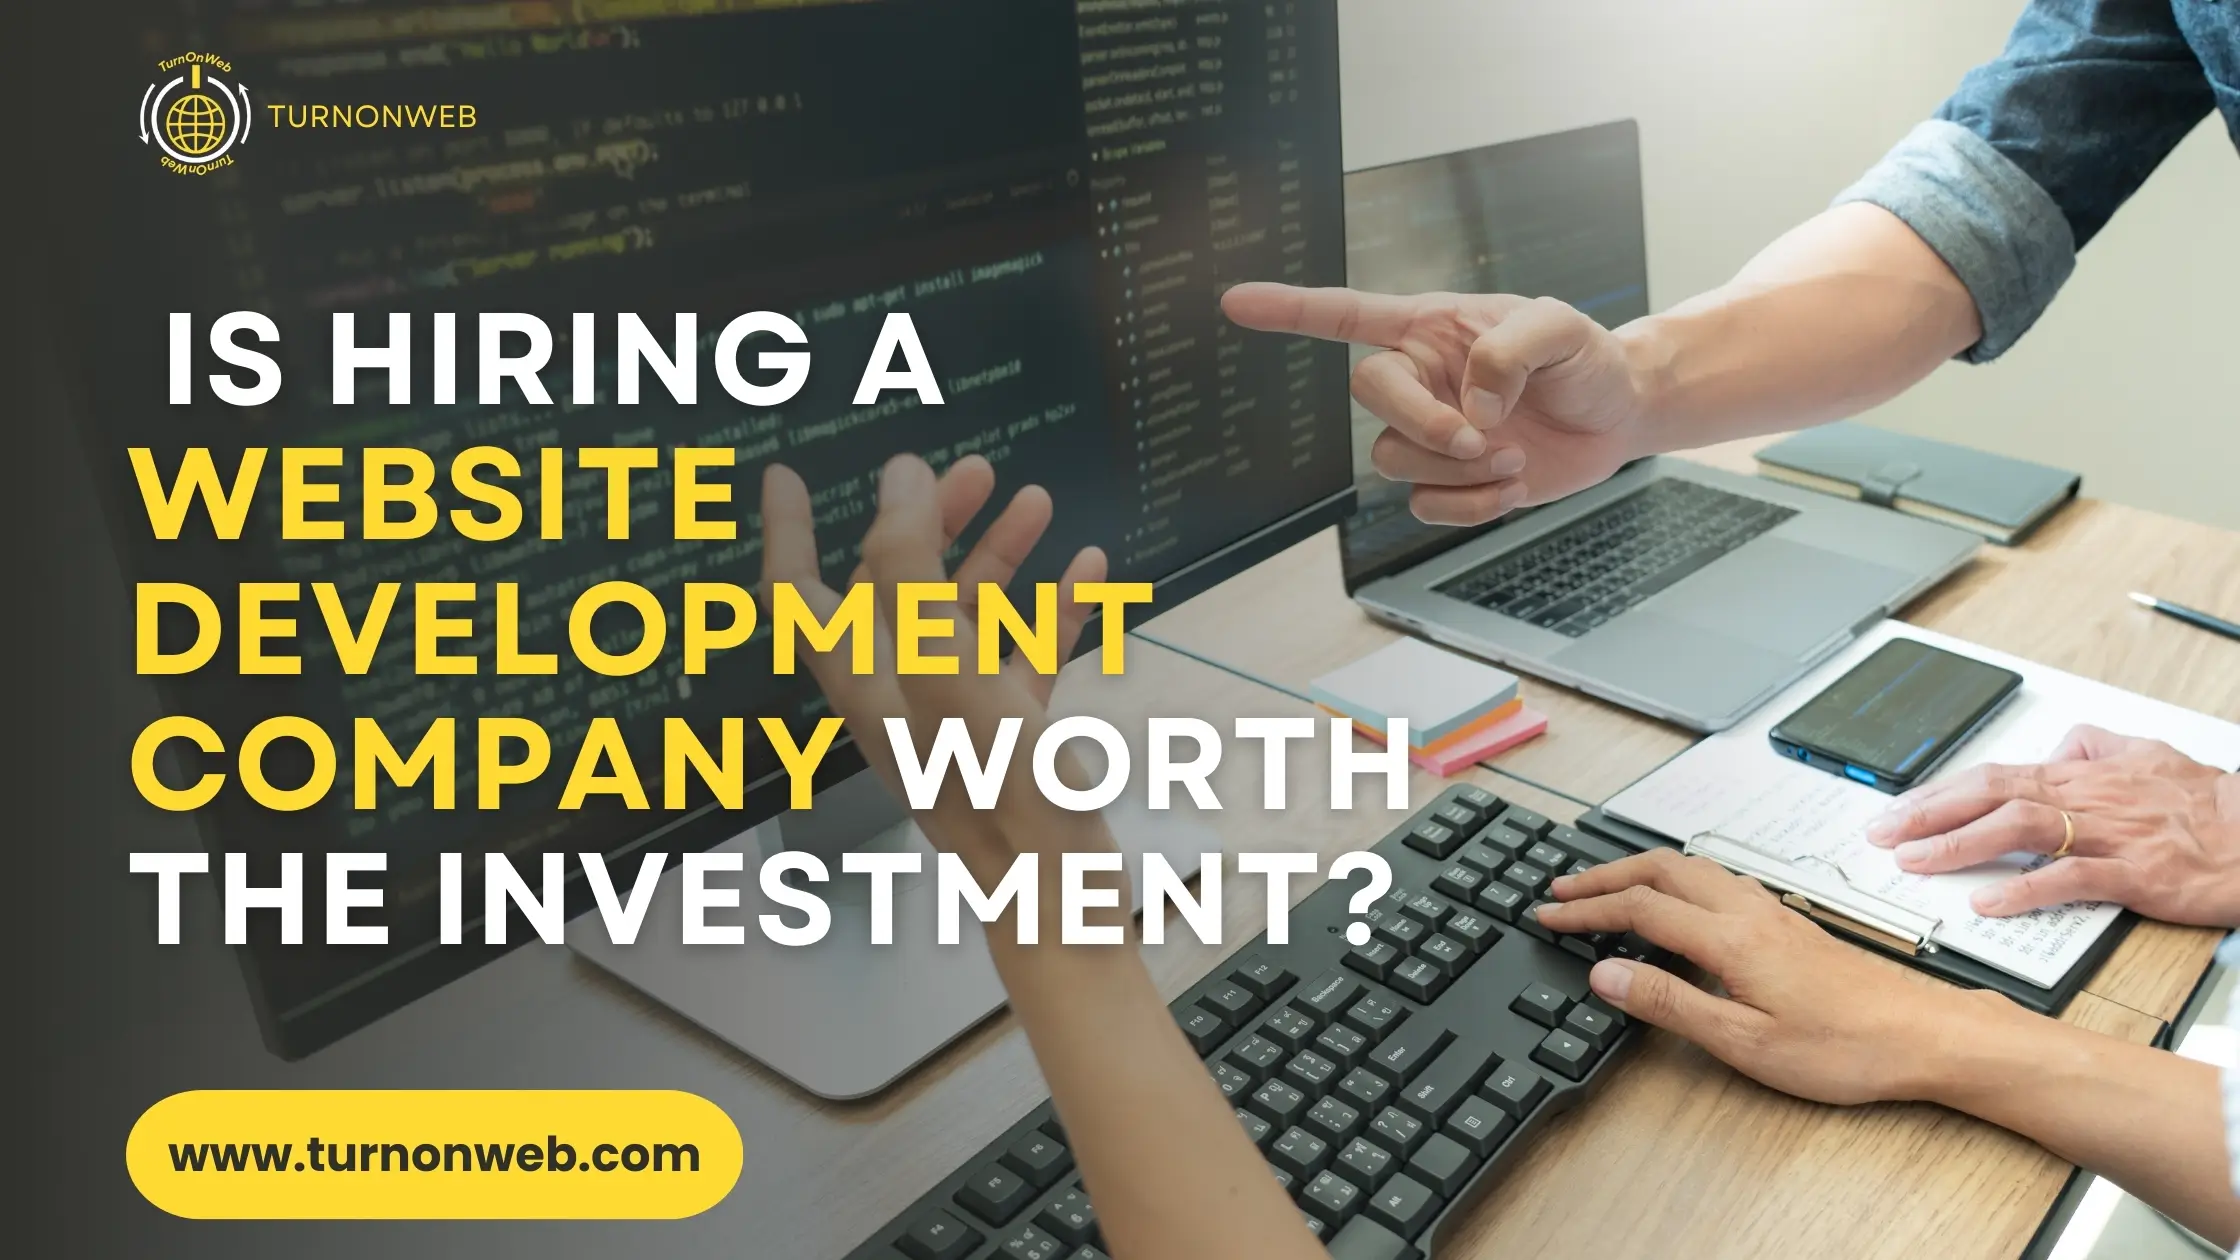 Is Hiring a Website Development Company Worth the Investment?